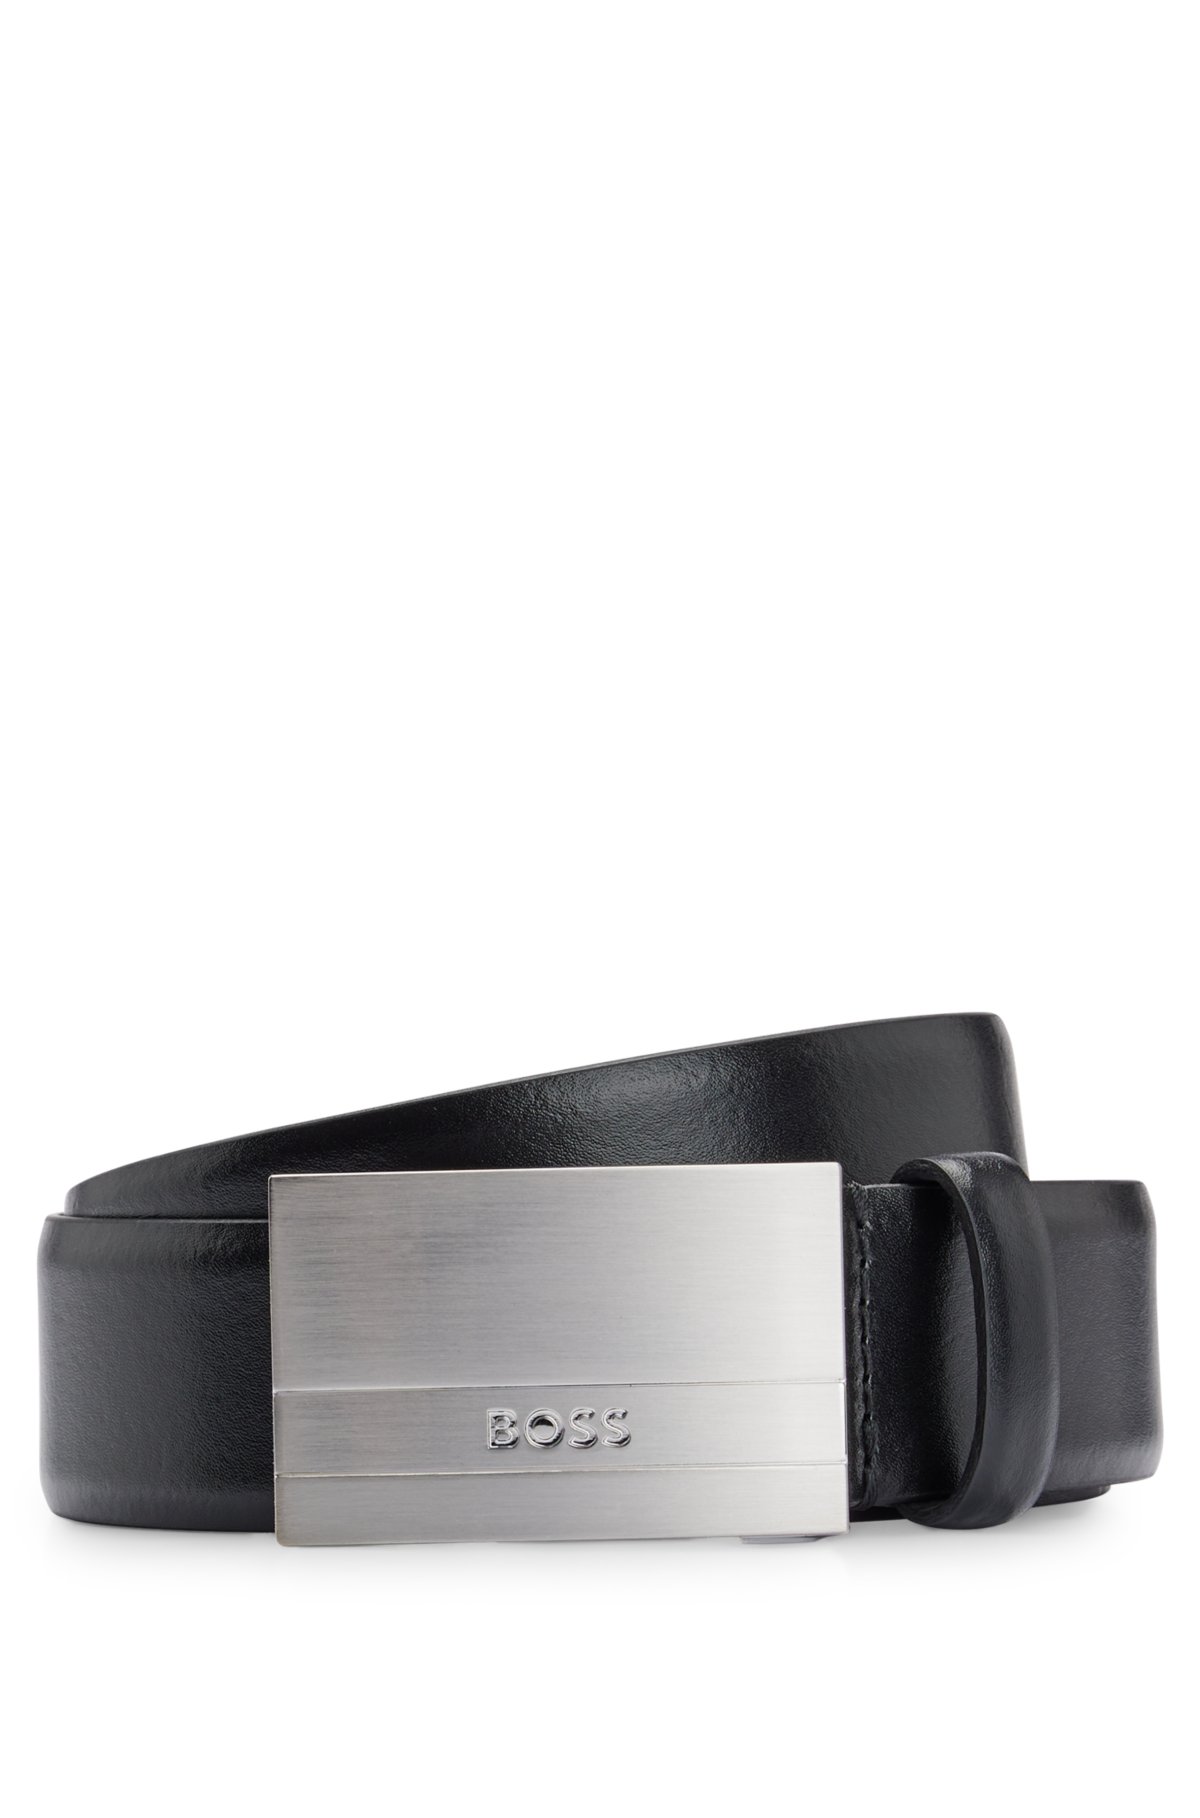 Skrive ud Abe Grunde BOSS - Italian-leather belt with logo-engraved plaque buckle